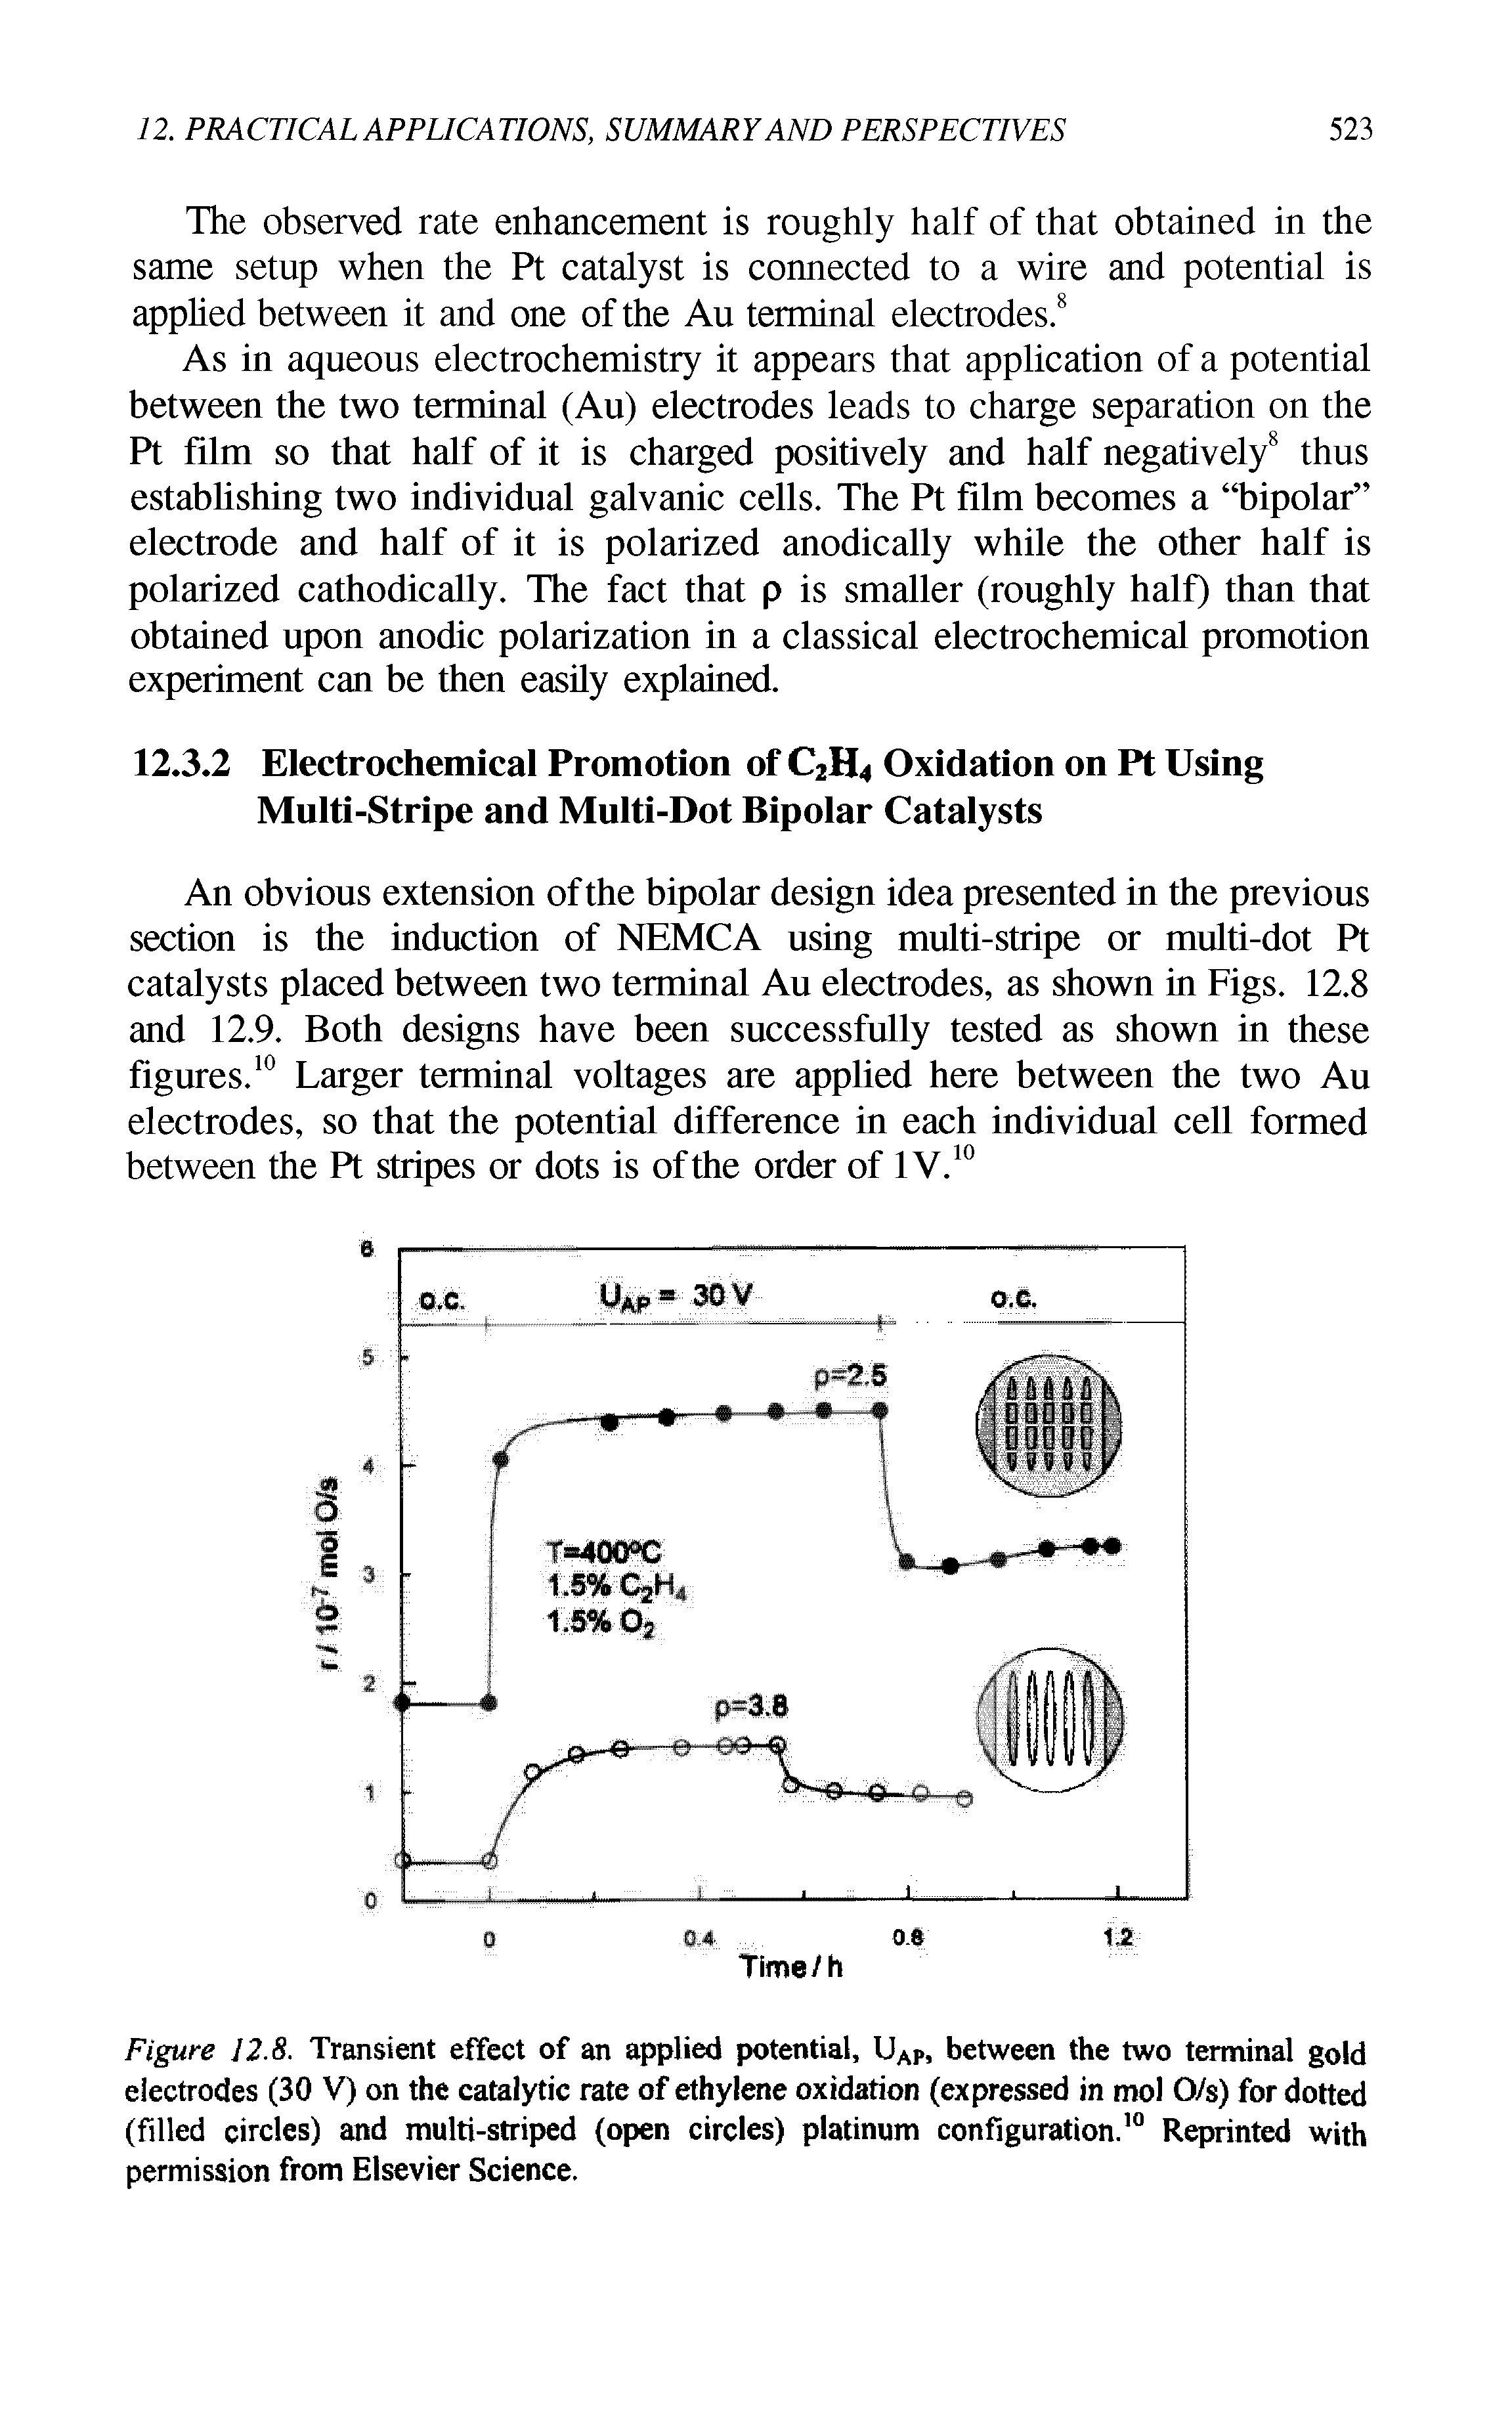 Figure 12.8. Transient effect of an applied potential, UAP, between the two terminal gold electrodes (30 V) on the catalytic rate of ethylene oxidation (expressed in mol O/s) for dotted (filled circles) and multi-striped (open circles) platinum configuration.10 Reprinted with permission from Elsevier Science.